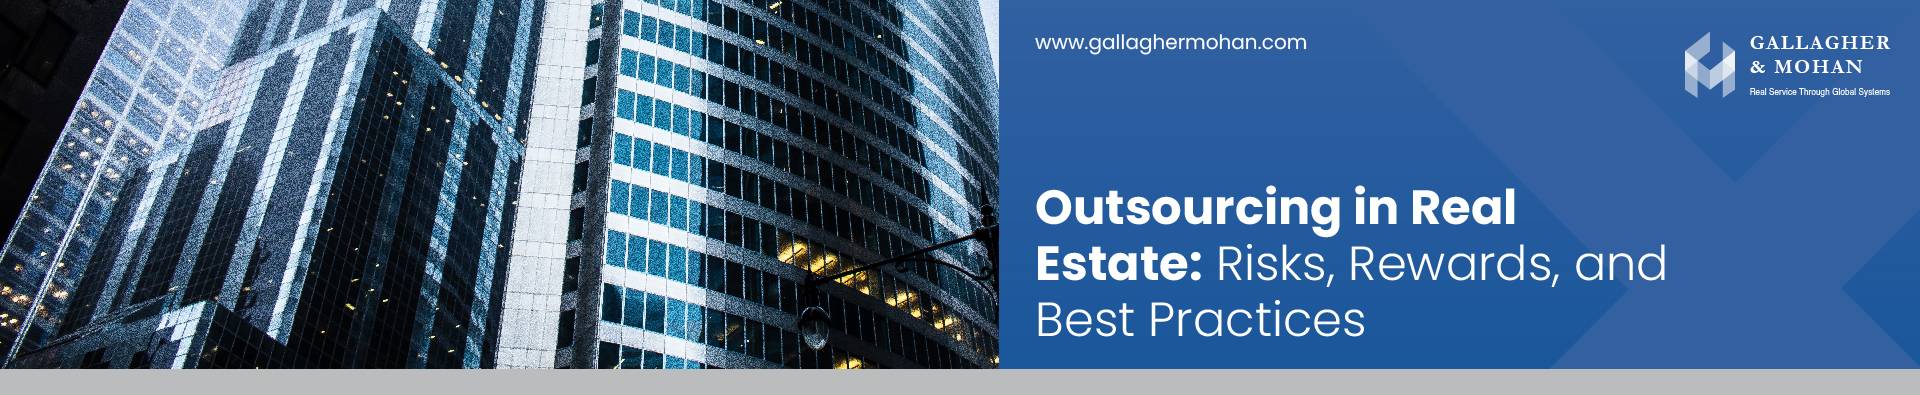 Outsourcing In Real Estate Risks, Rewards, And Best Practices